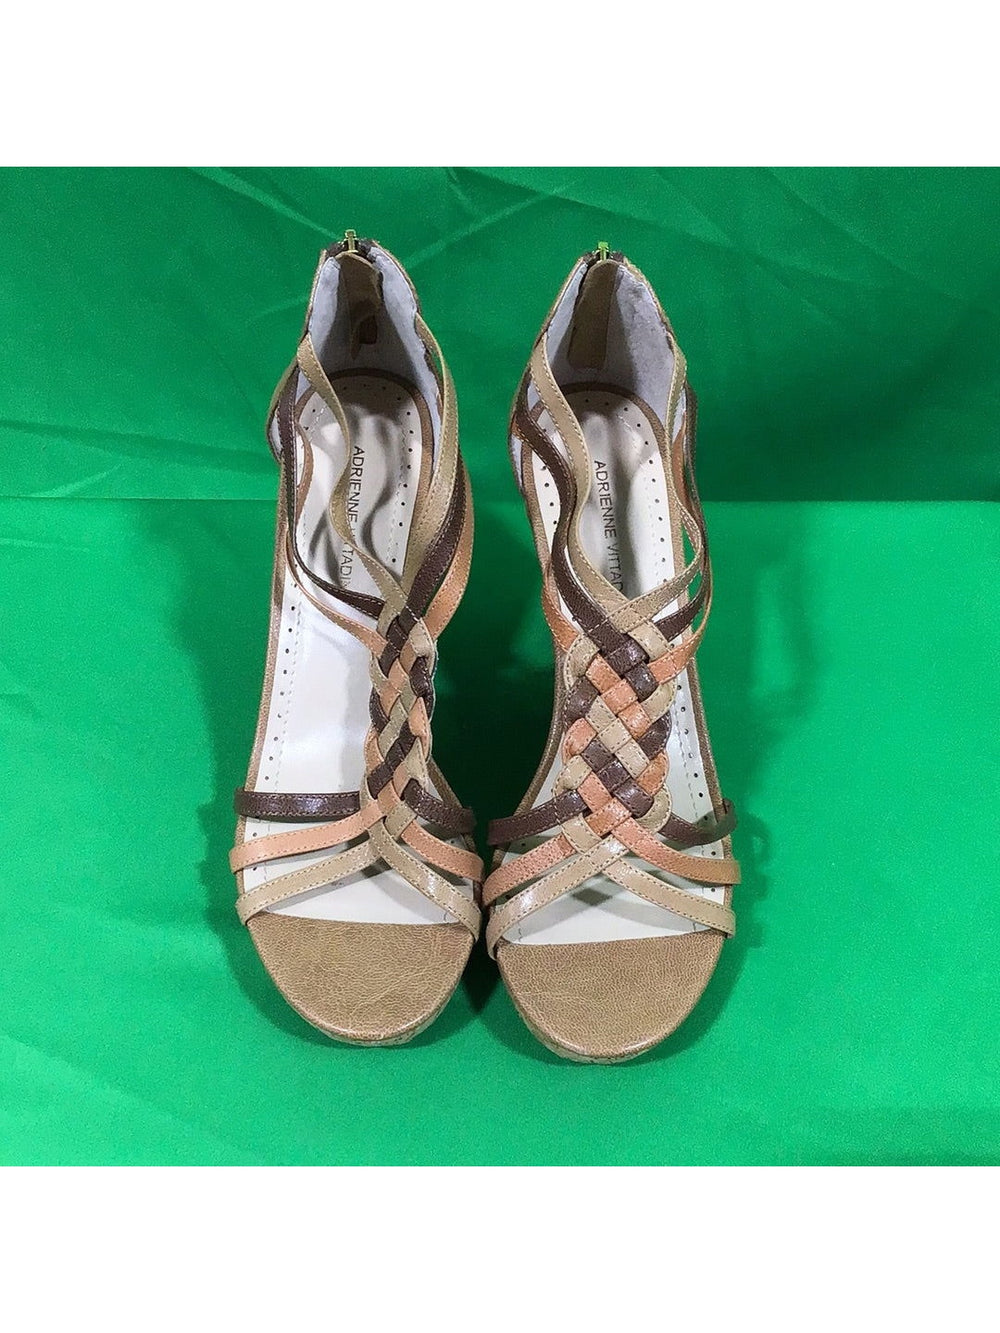 Adrienne Vittadini Carmen Women's Size 8 M Multi Color Wedge Shoes - In Box - The Kennedy Collective Thrift - 